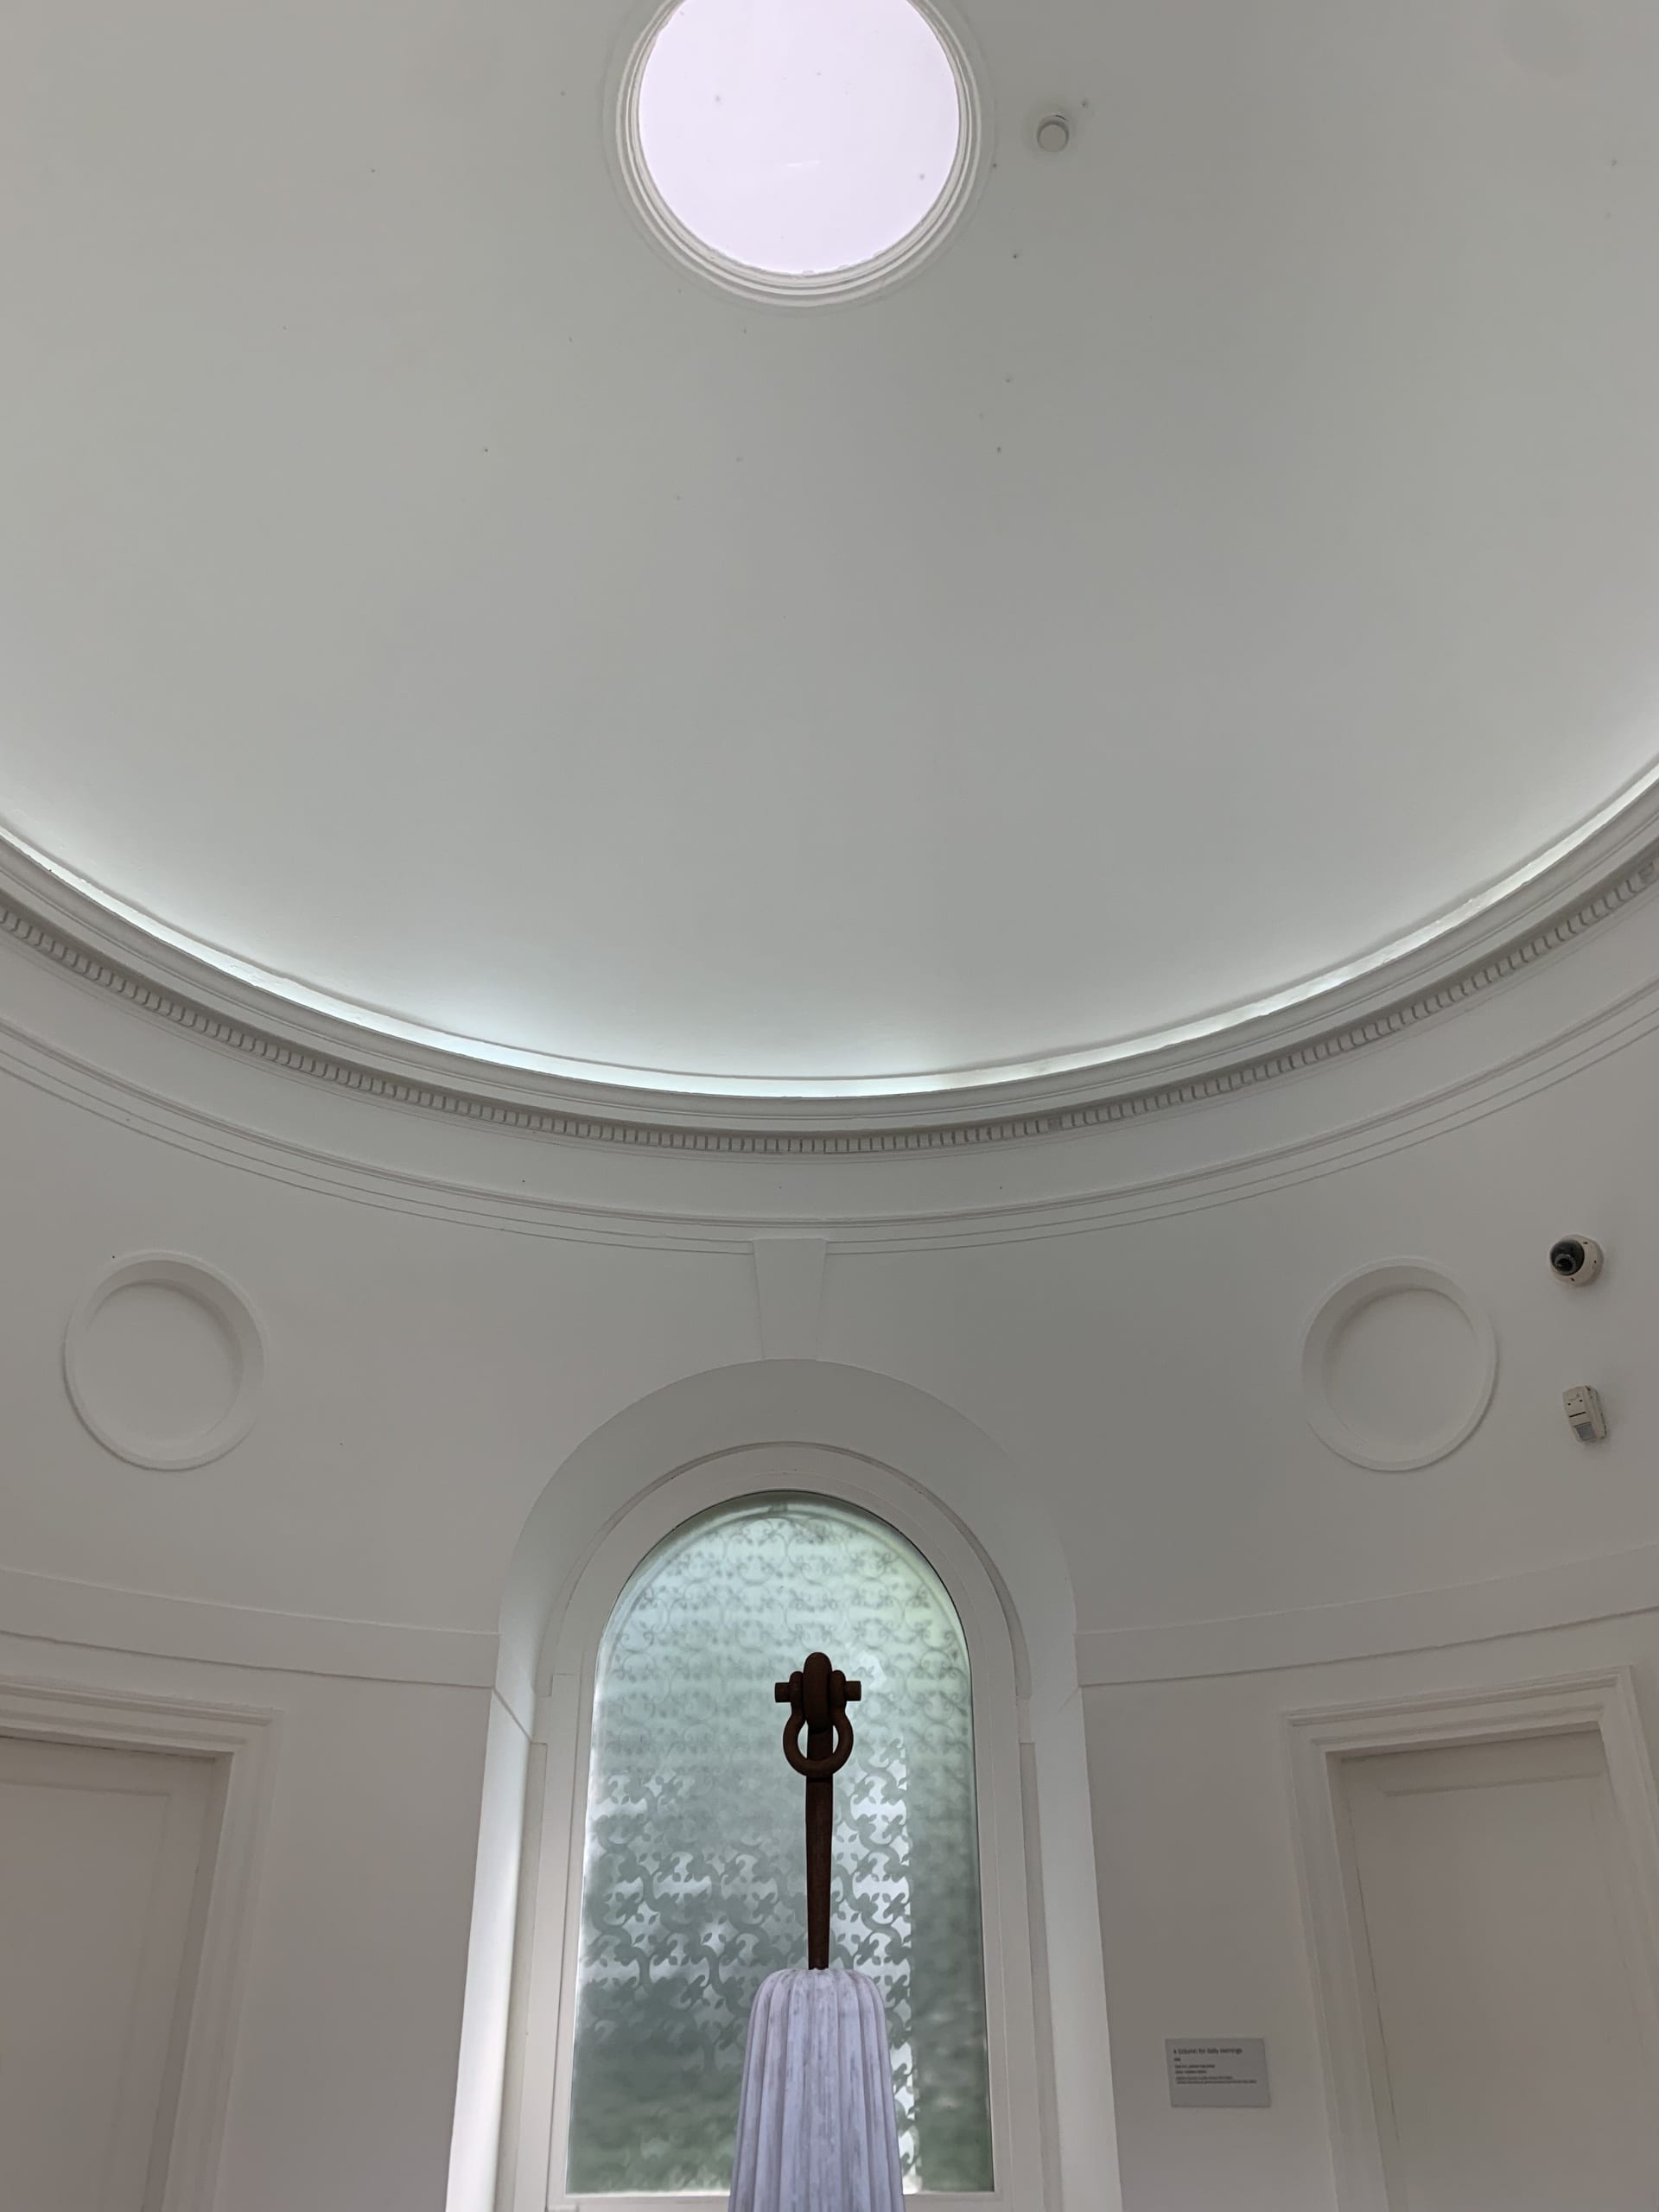 light-filled Neo-Classical rotunda with an oculus. A tapered column from which a single iron shackle rises